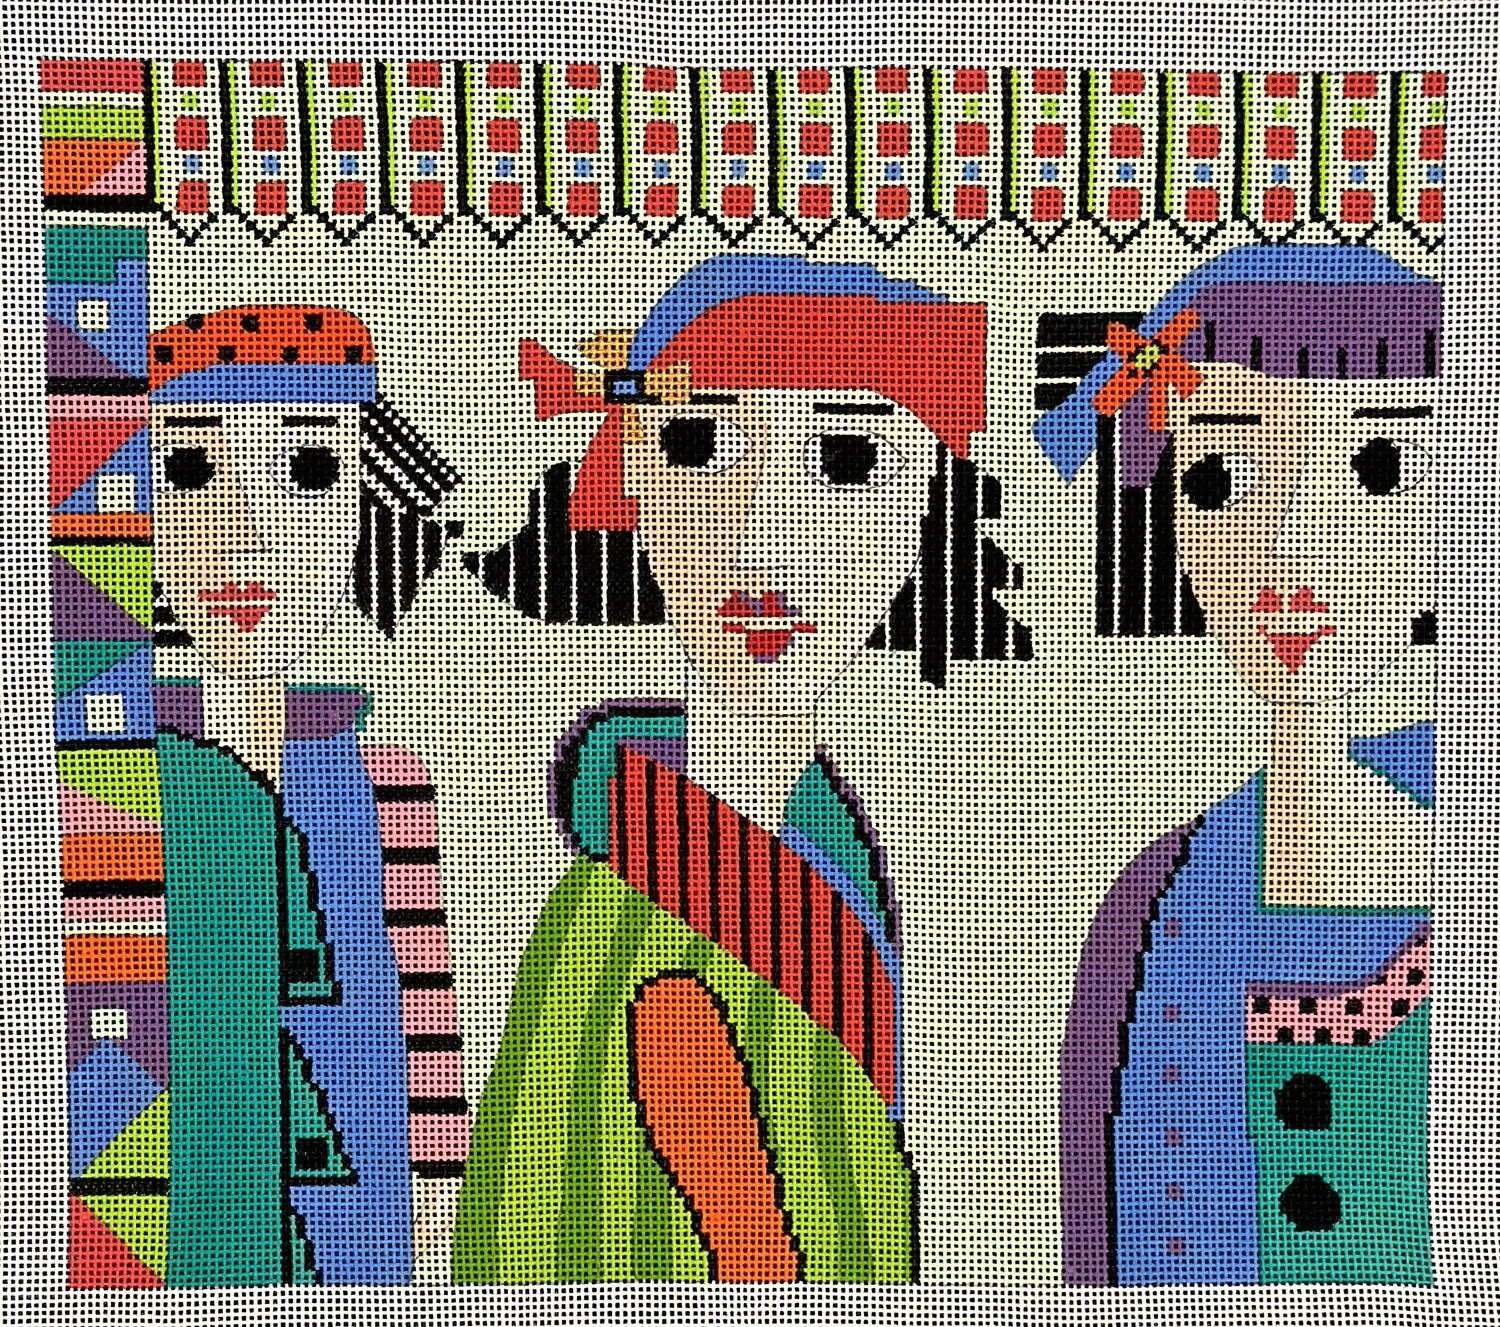 Girls (Handpainted by Penny McLeod)